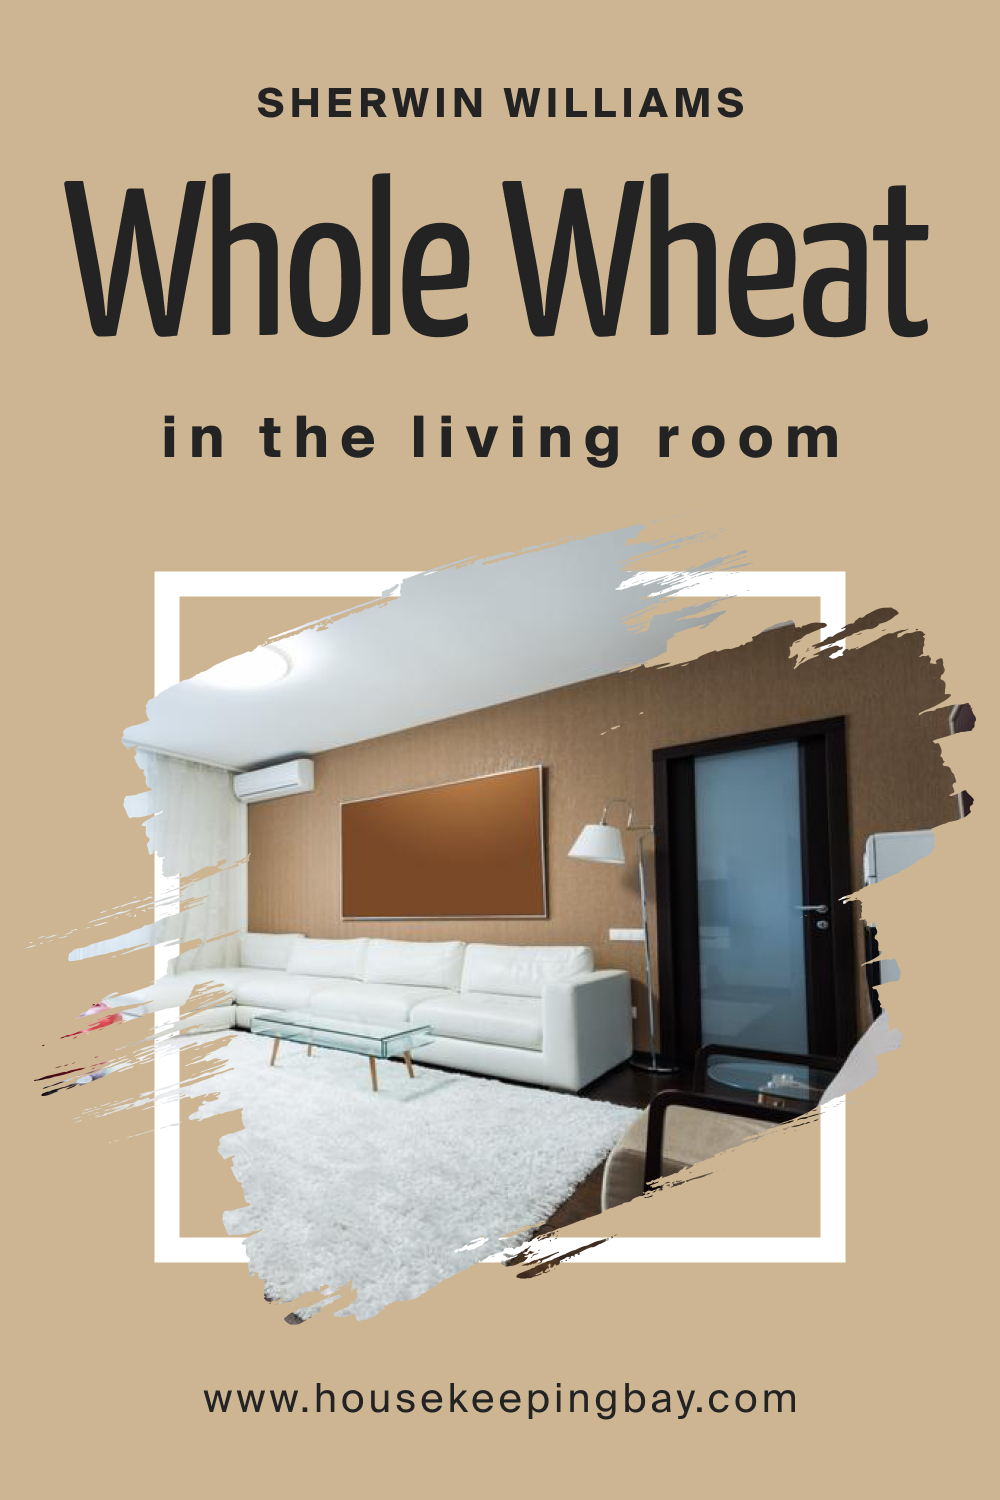 Sherwin Williams. SW Whole Wheat In the Living Room